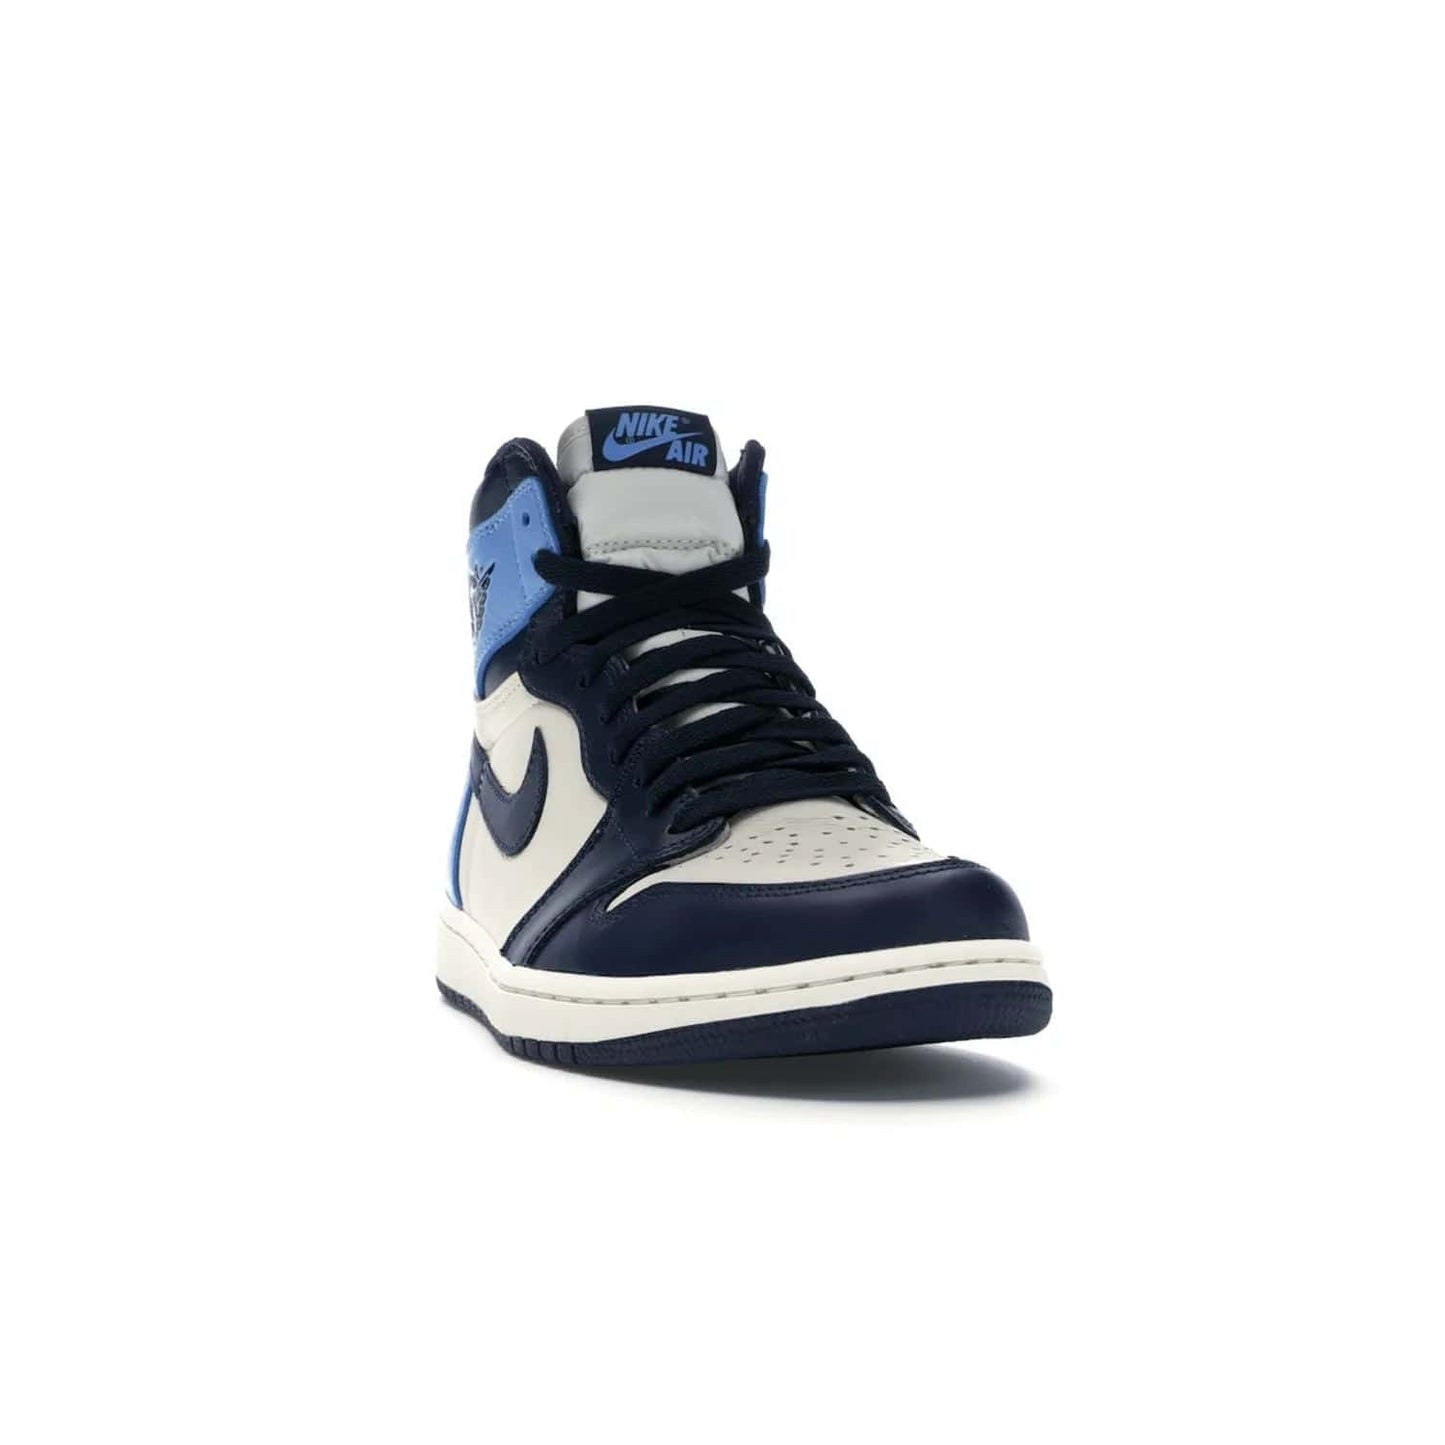 Jordan 1 Retro High Obsidian UNC - Image 8 - Only at www.BallersClubKickz.com - Bring a timeless classic to your wardrobe with the Air Jordan 1 Retro High "Obsidian/University Blue”. A full leather upper combines Obsidian and University Blue detailing for a retro Jordan style. Stitched Jumpman logo pays tribute to UNC. Experience classic style with a timeless sneaker.